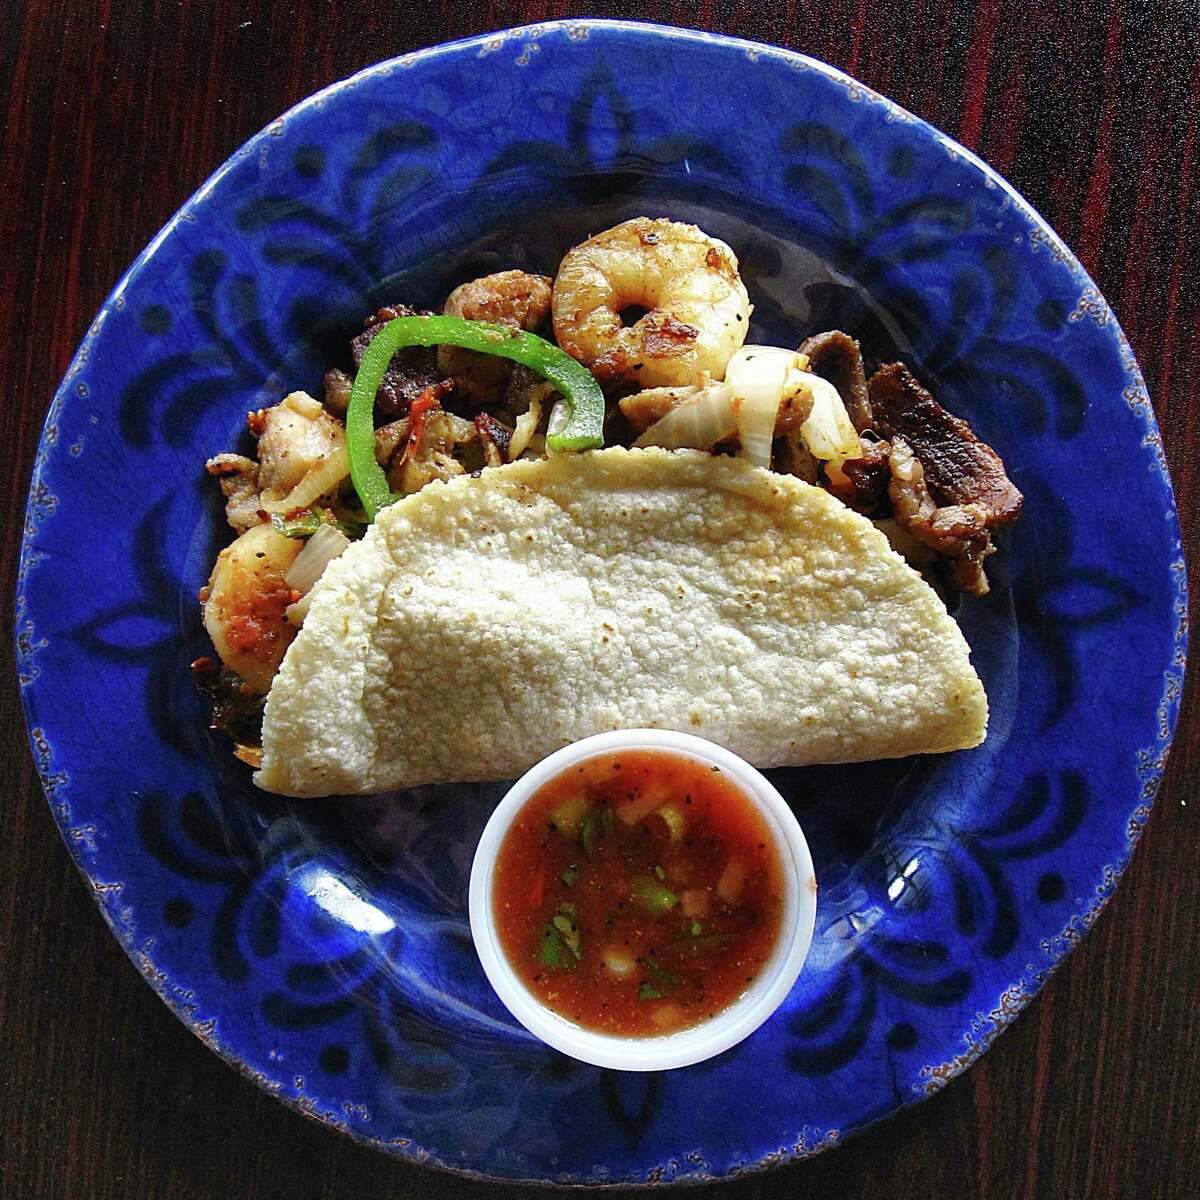 Tacof of the Week: "A La Casa" taco with grilled shrimp, chicken and beef on a handmade corn tortilla from Don Jose Mexican Cafe.